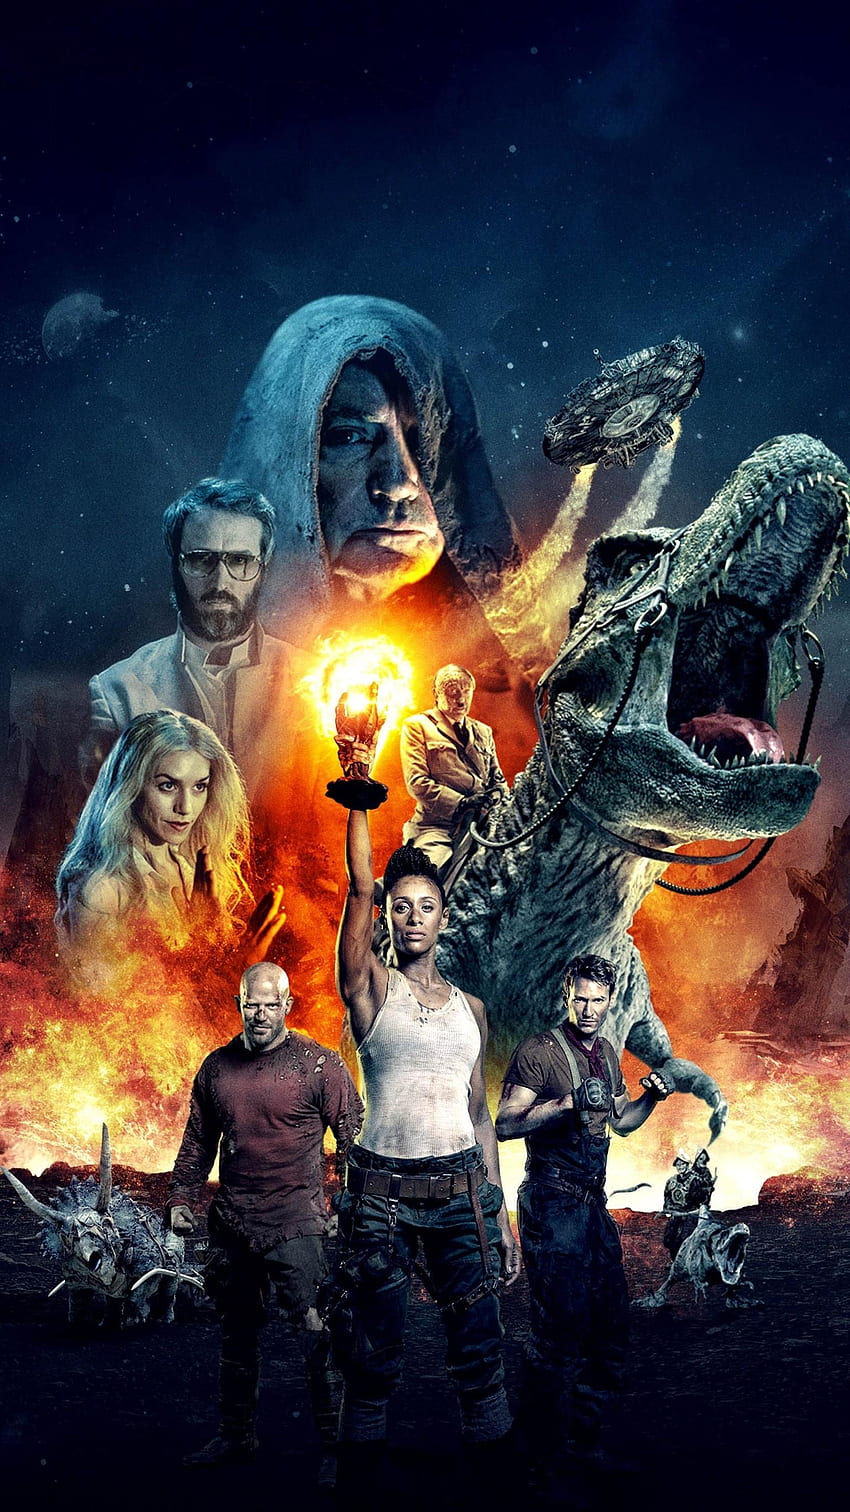 Iron Sky The Coming Race (2022) movie HD phone wallpaper